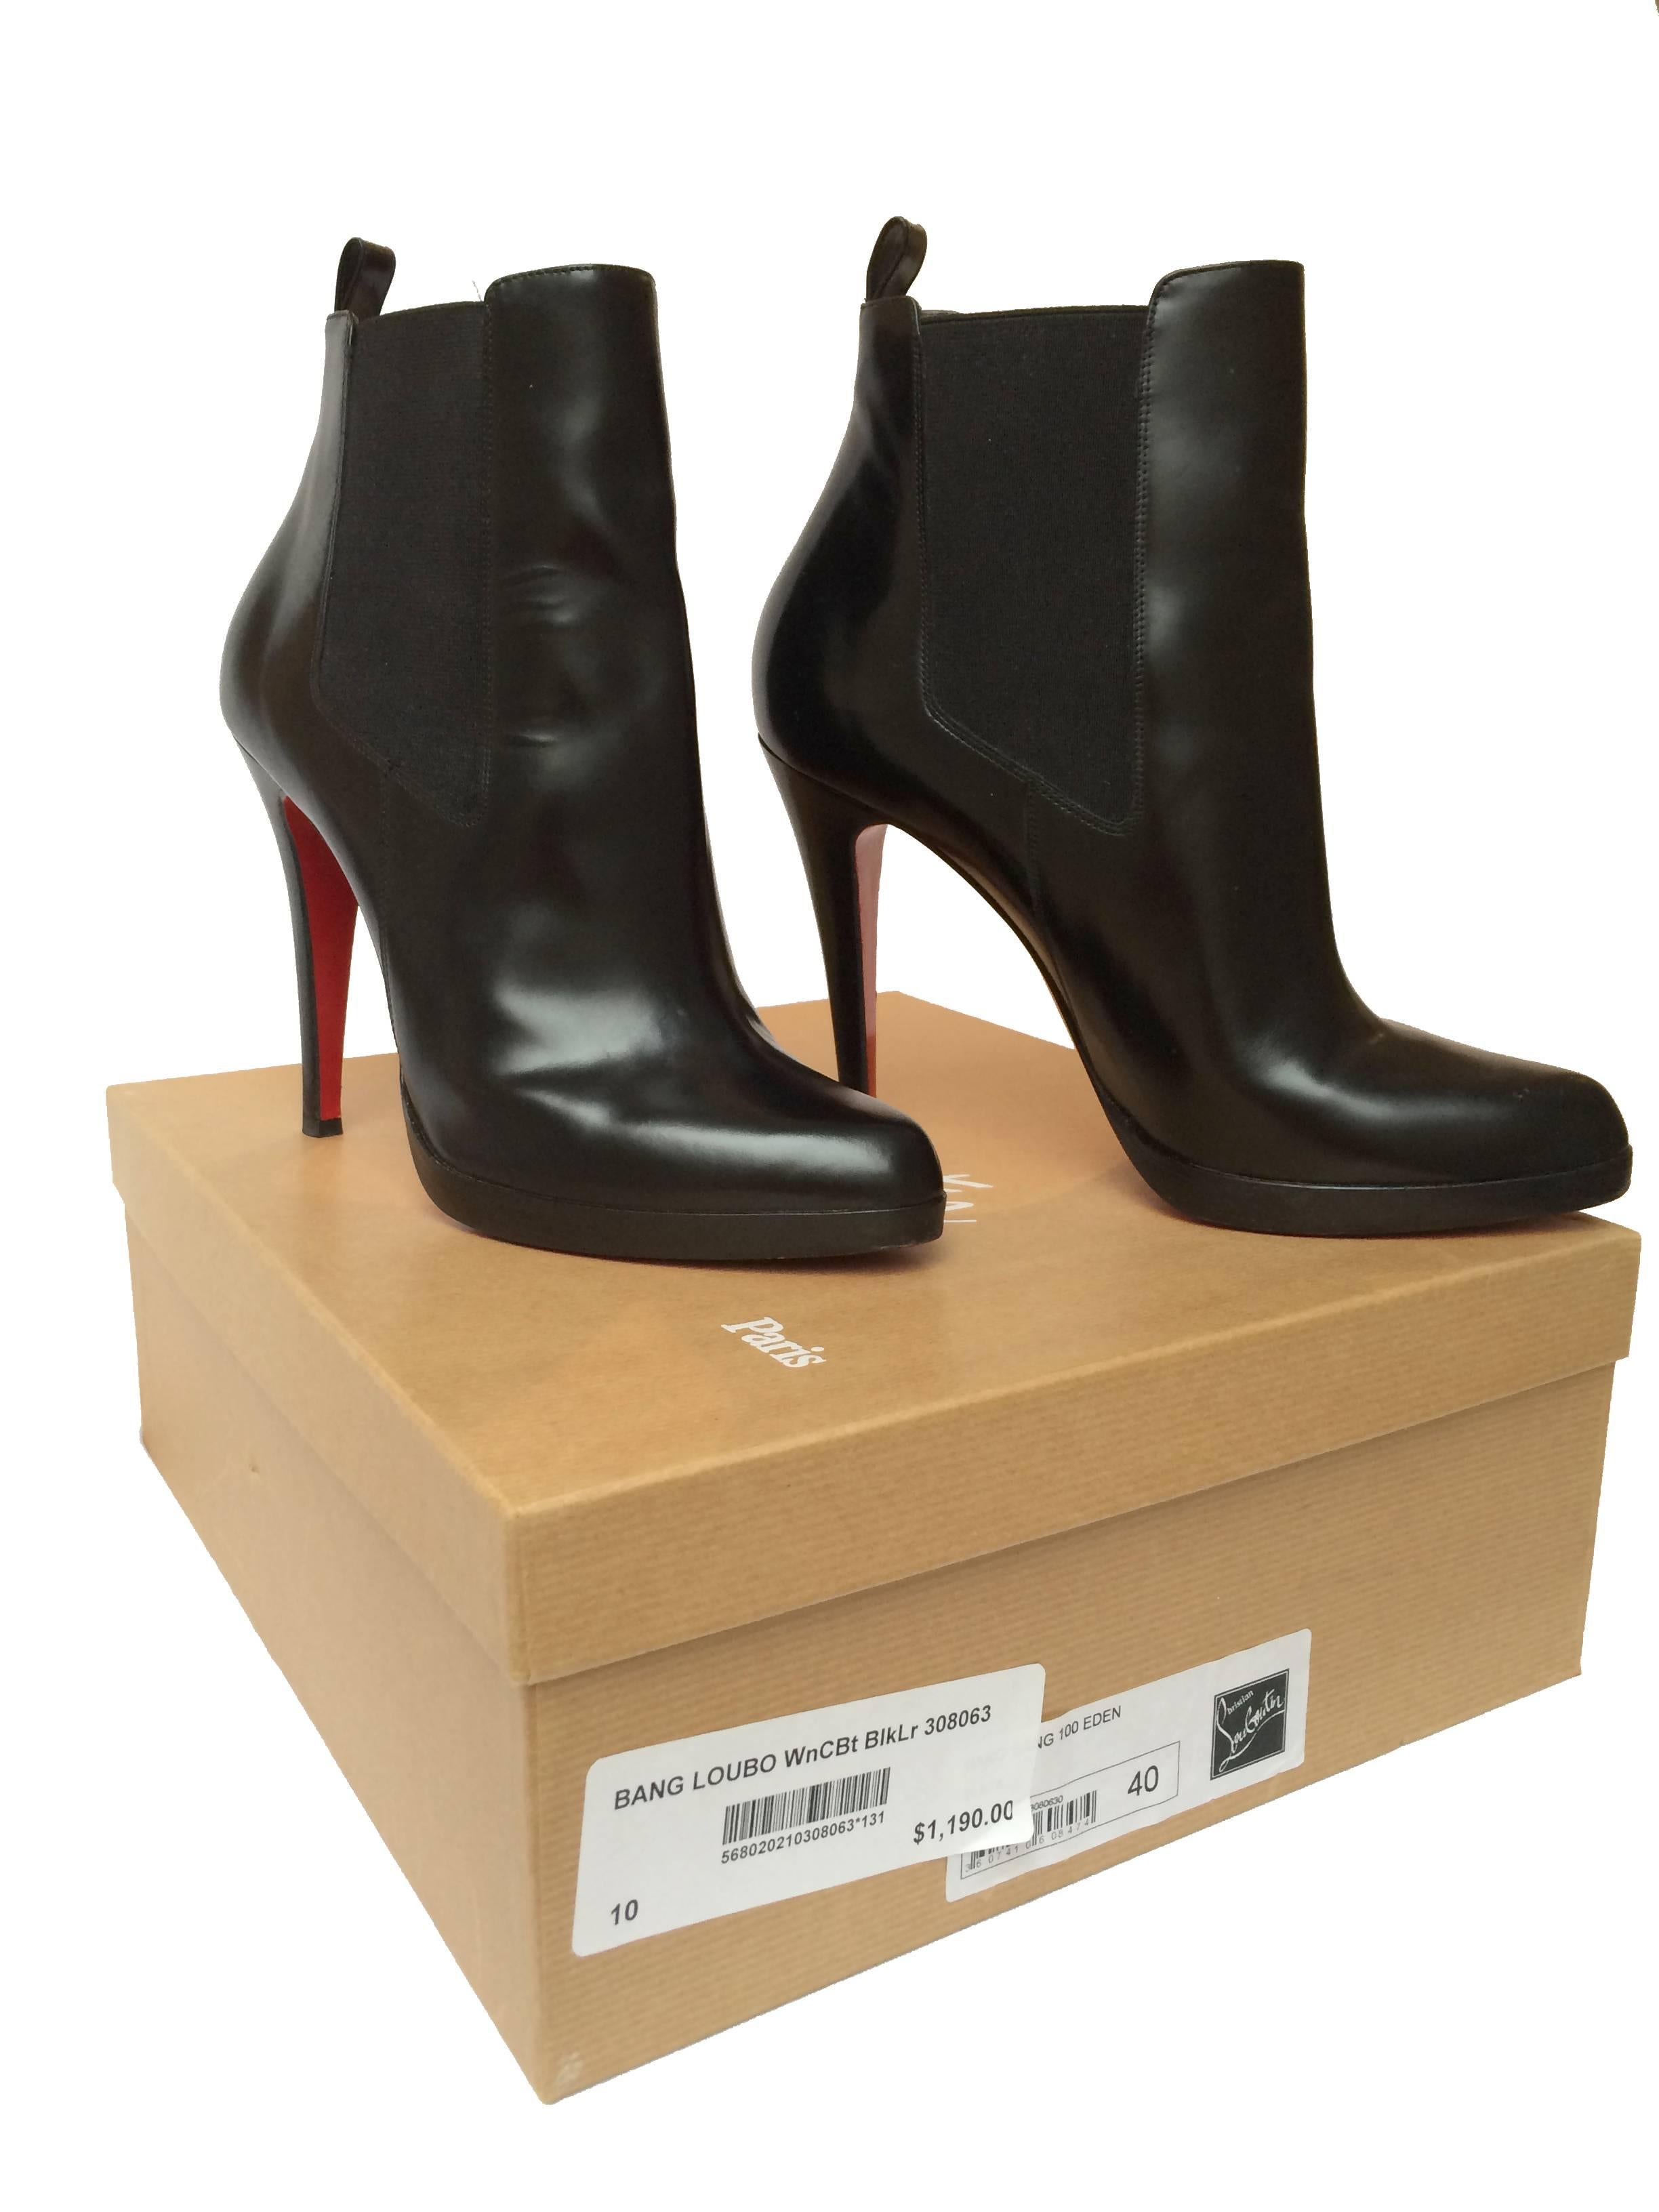 These are simple black ankle boots which will give any outfit a sophisticated look. The Chelsea style boots are made with a high polished black leather.

The stiletto heel measure about 5